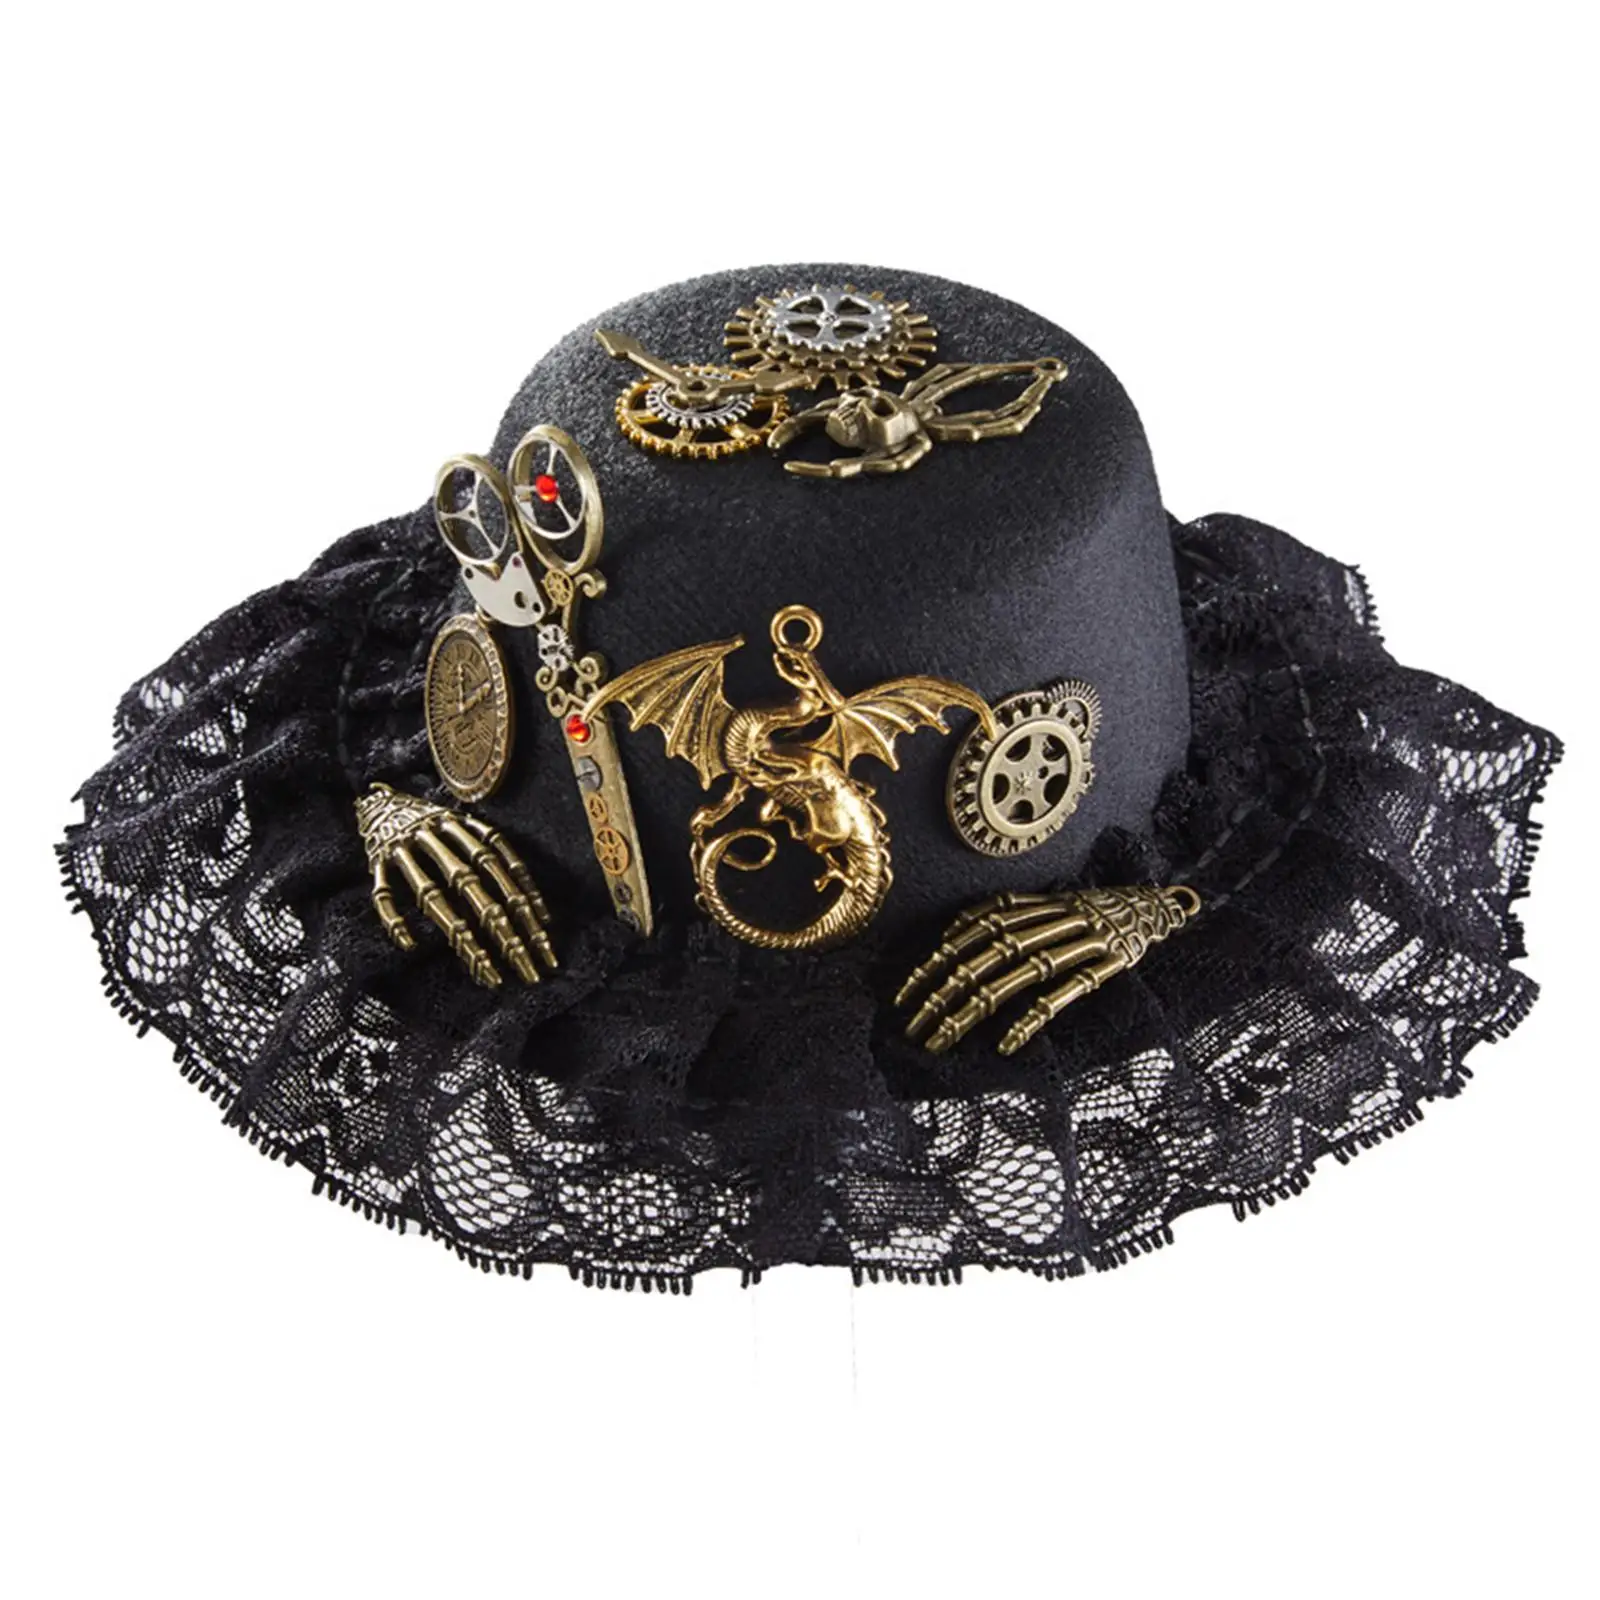 Vintage Style Funky Unisex Steampunk Top Hat Punk Fedoras Hats Pirate Party Supplies Photo Props Halloween Dress Up